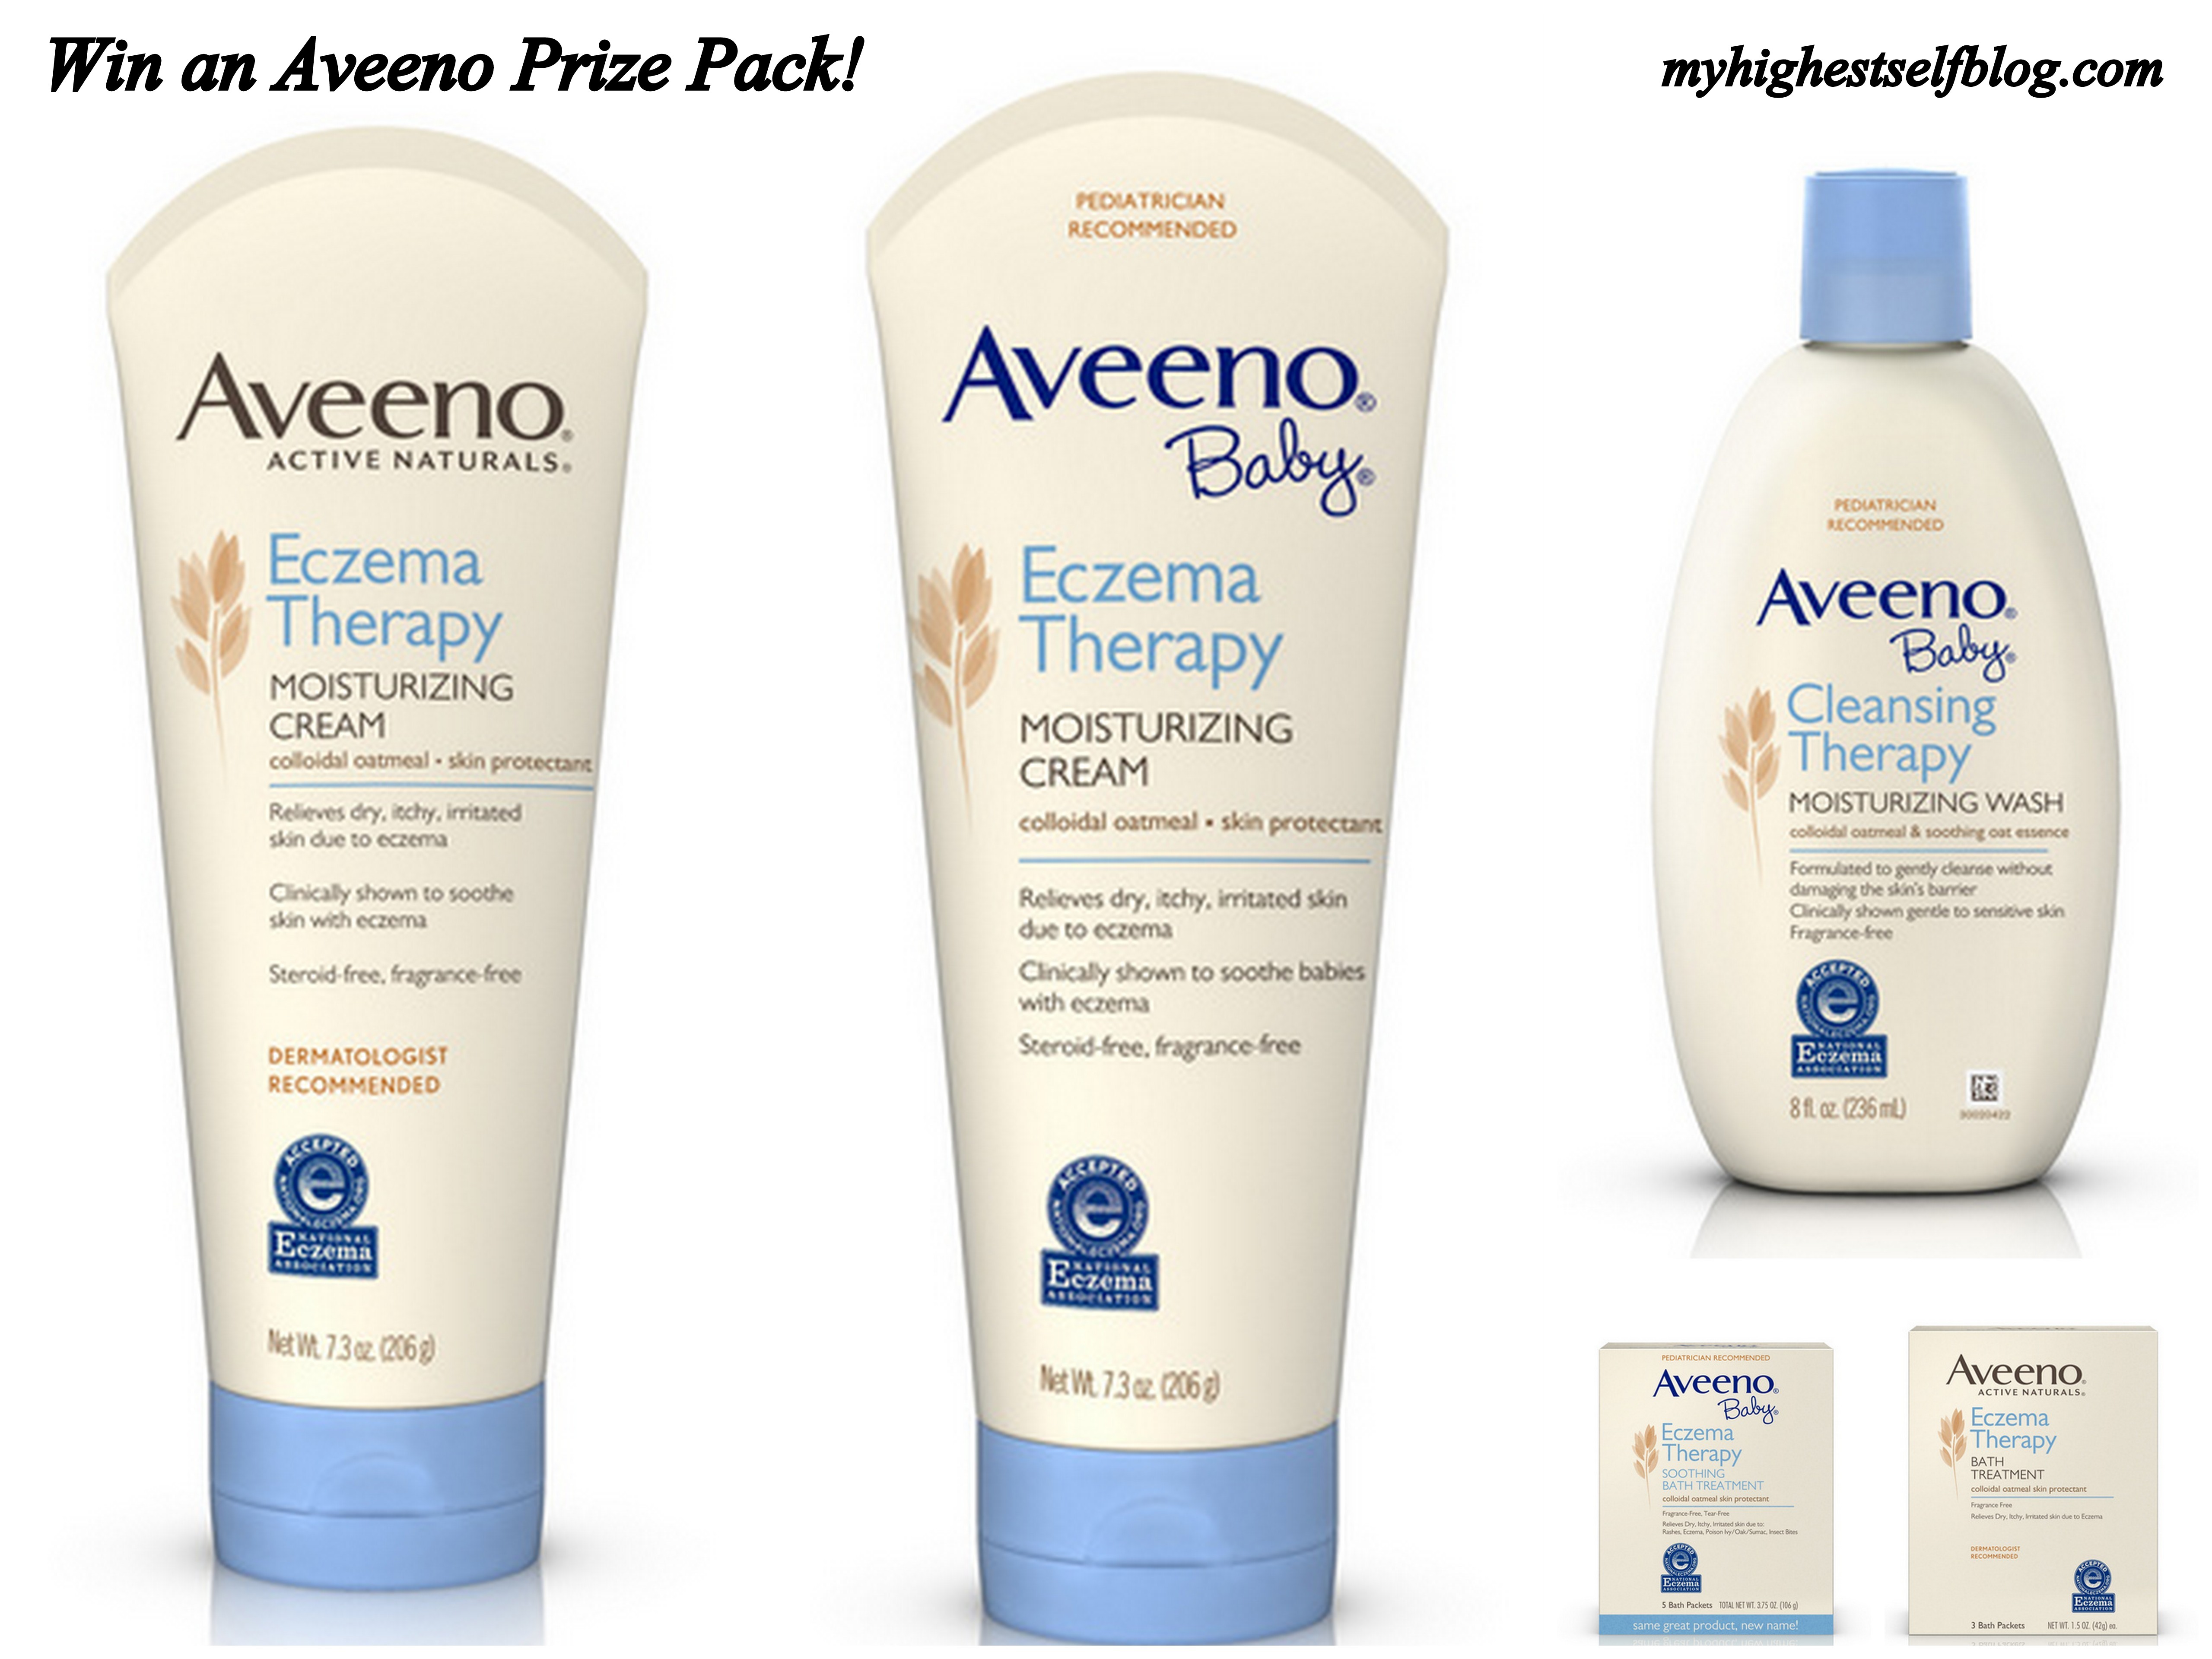 CLOSED Aveeno Giveaway! Win a Prize Pack worth over $40 - My Highest Self